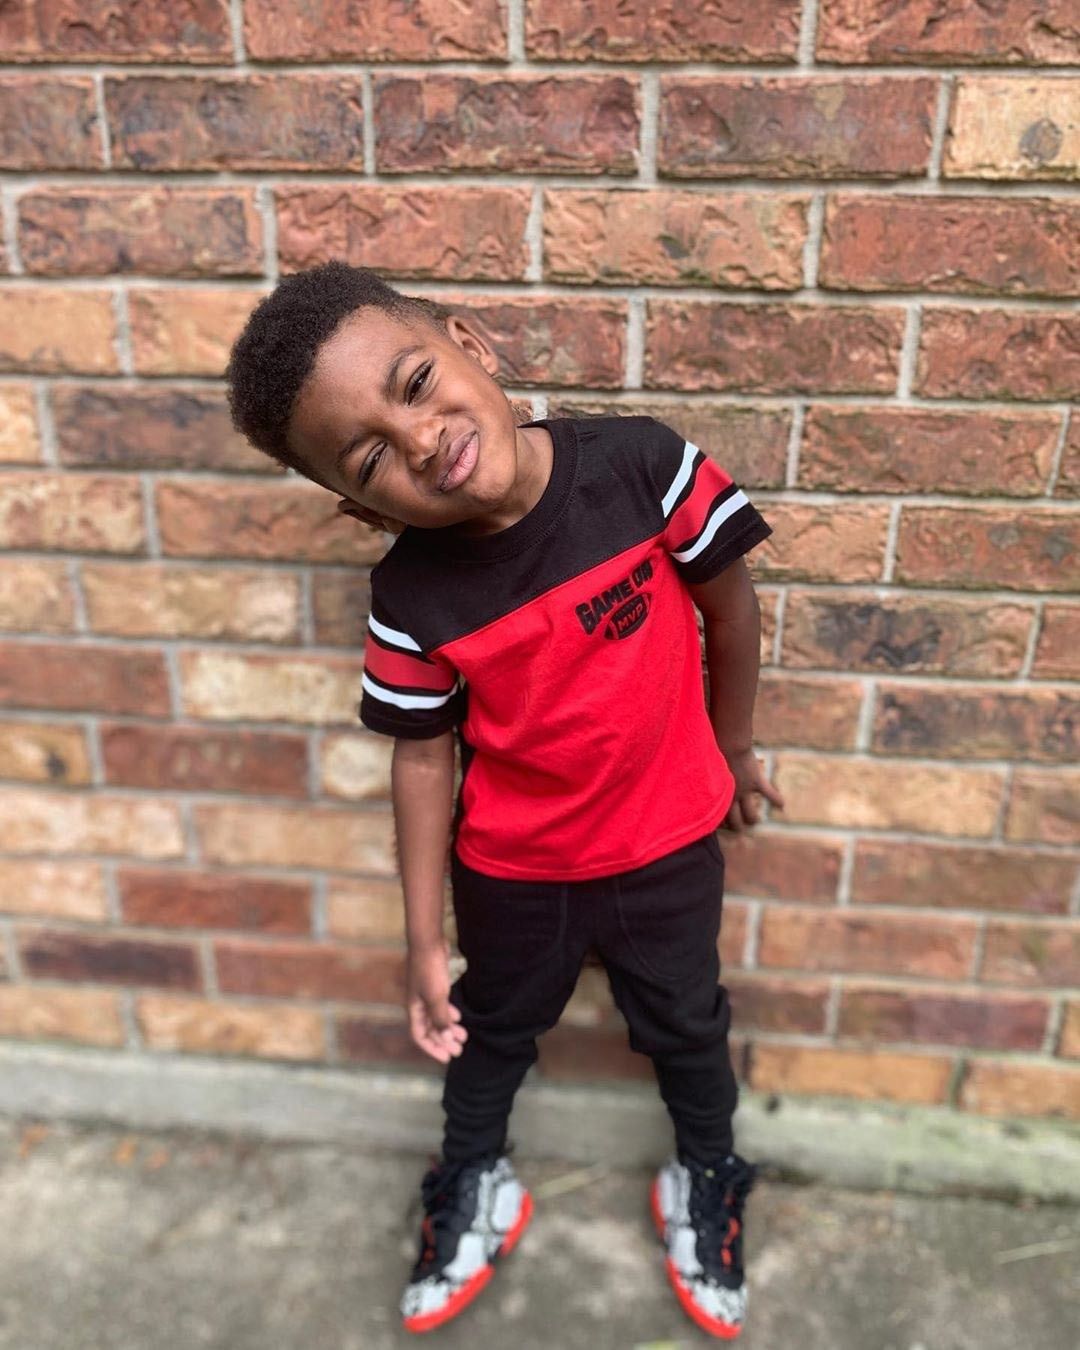 Kayden Gaulden standing in front of a brick wall wearing red and black shirt